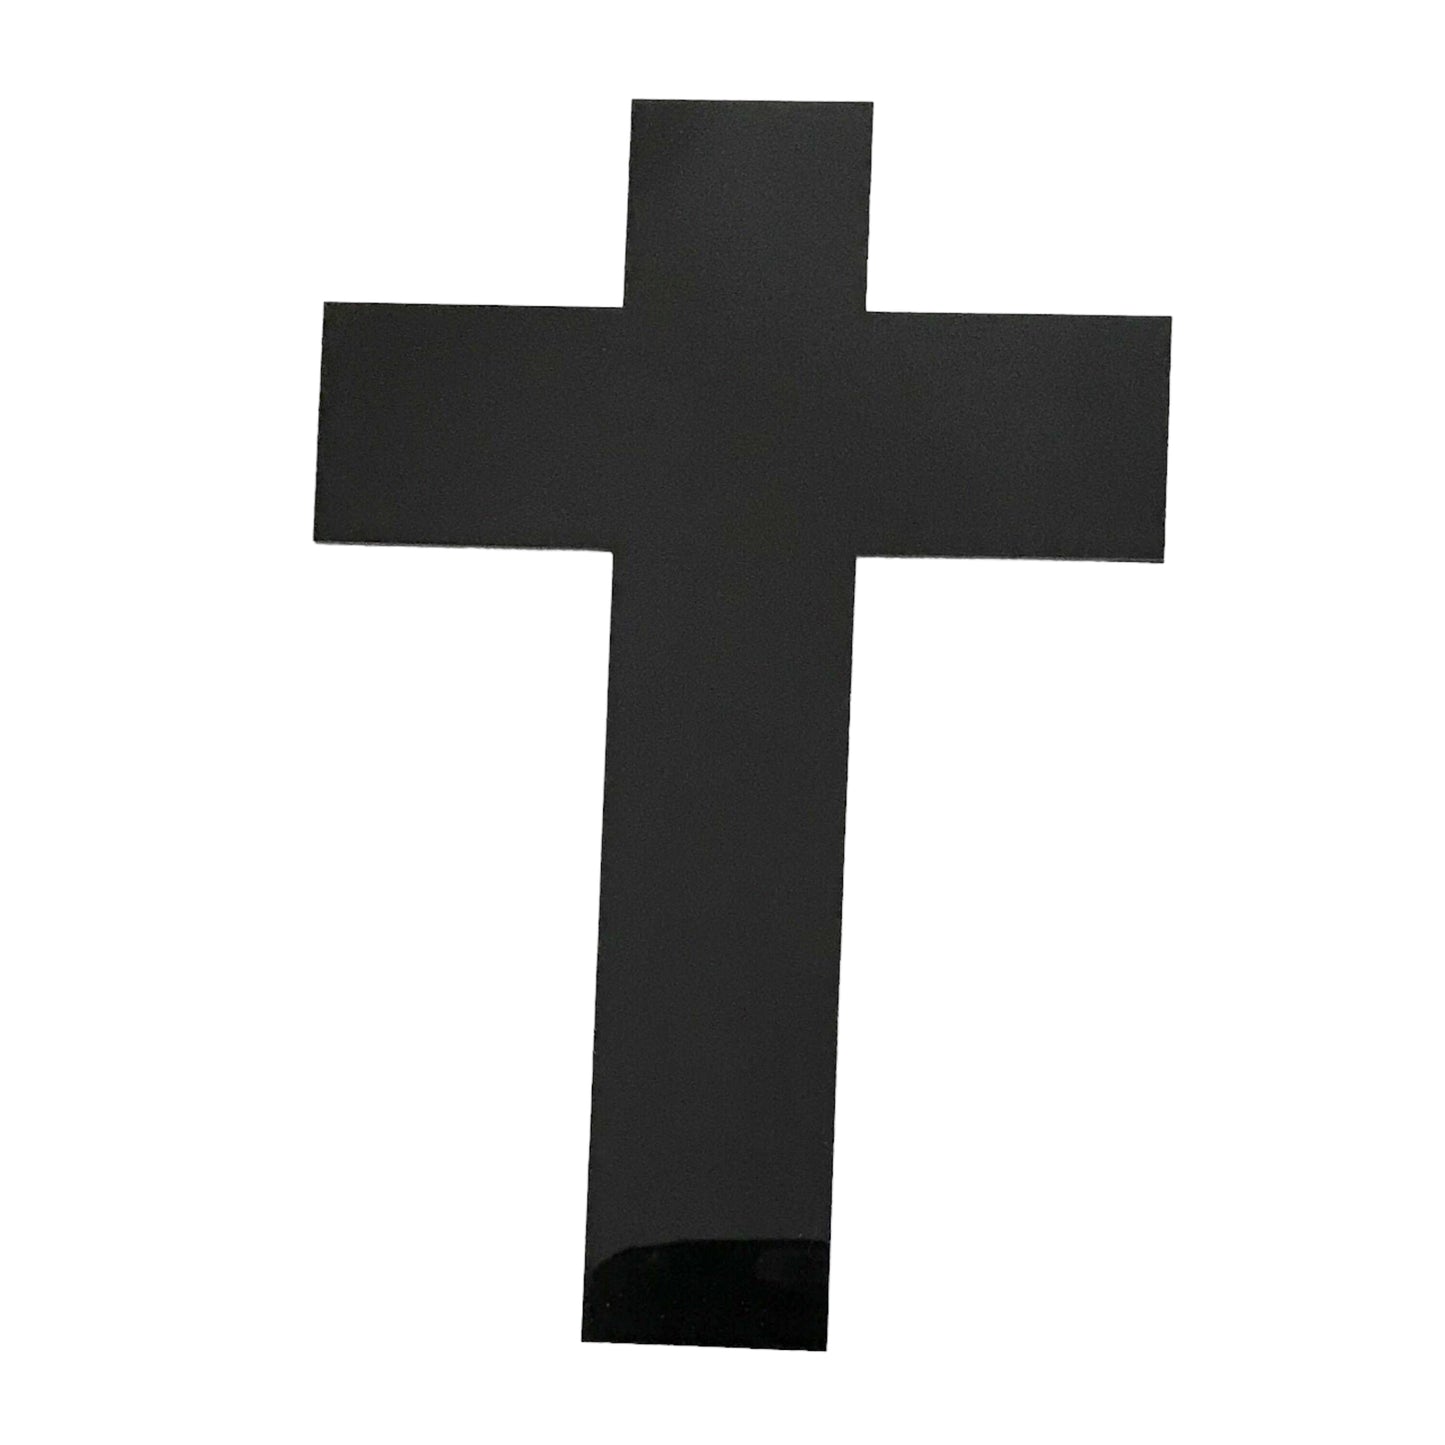 Cross Black or White Boho Acrylic Religious Decor - The Renmy Store Homewares & Gifts 